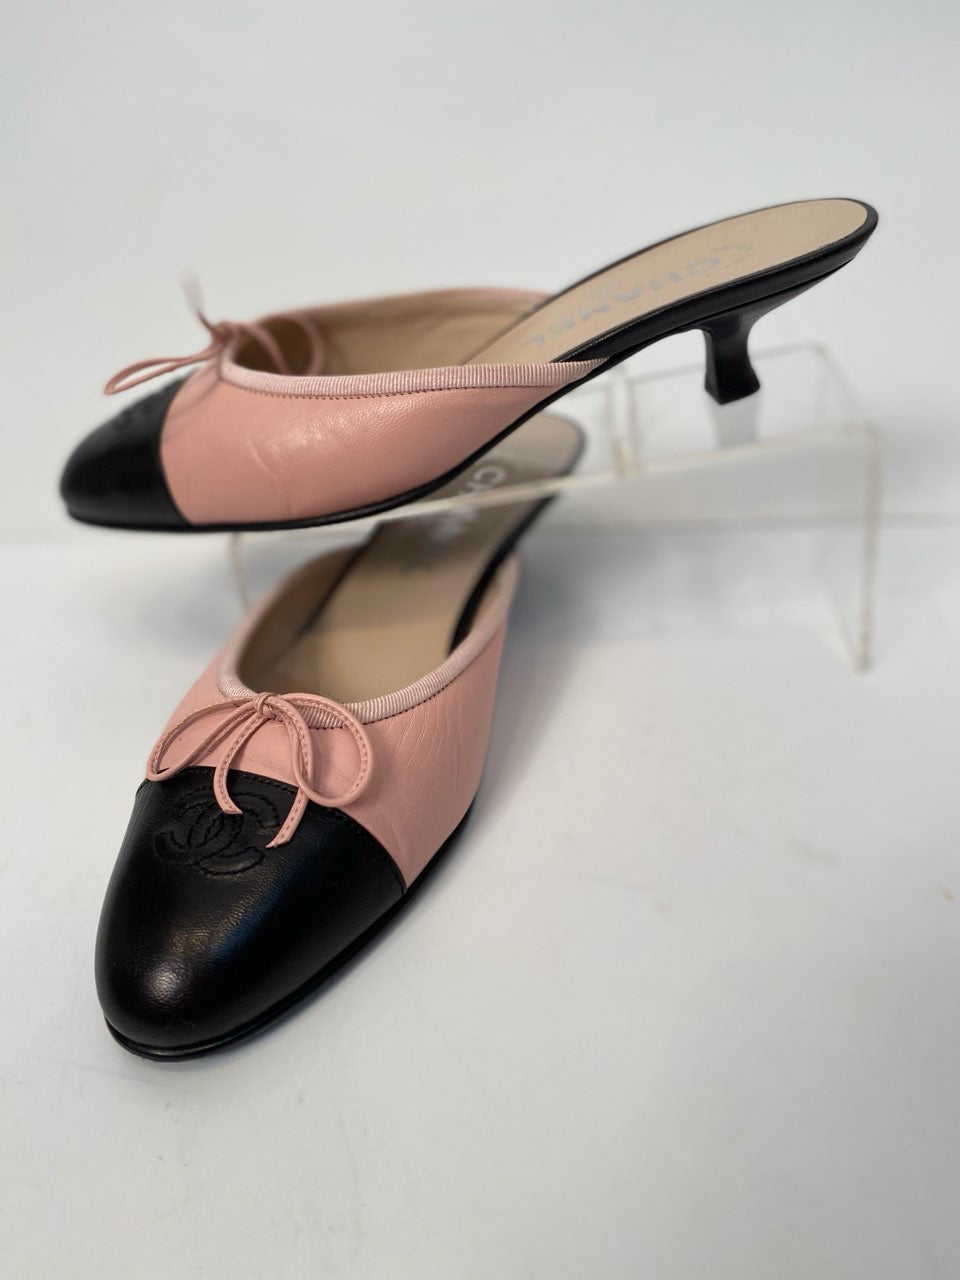 Chanel ballet flats: experience buying secondhand + first impressions -  Conscious by Komal